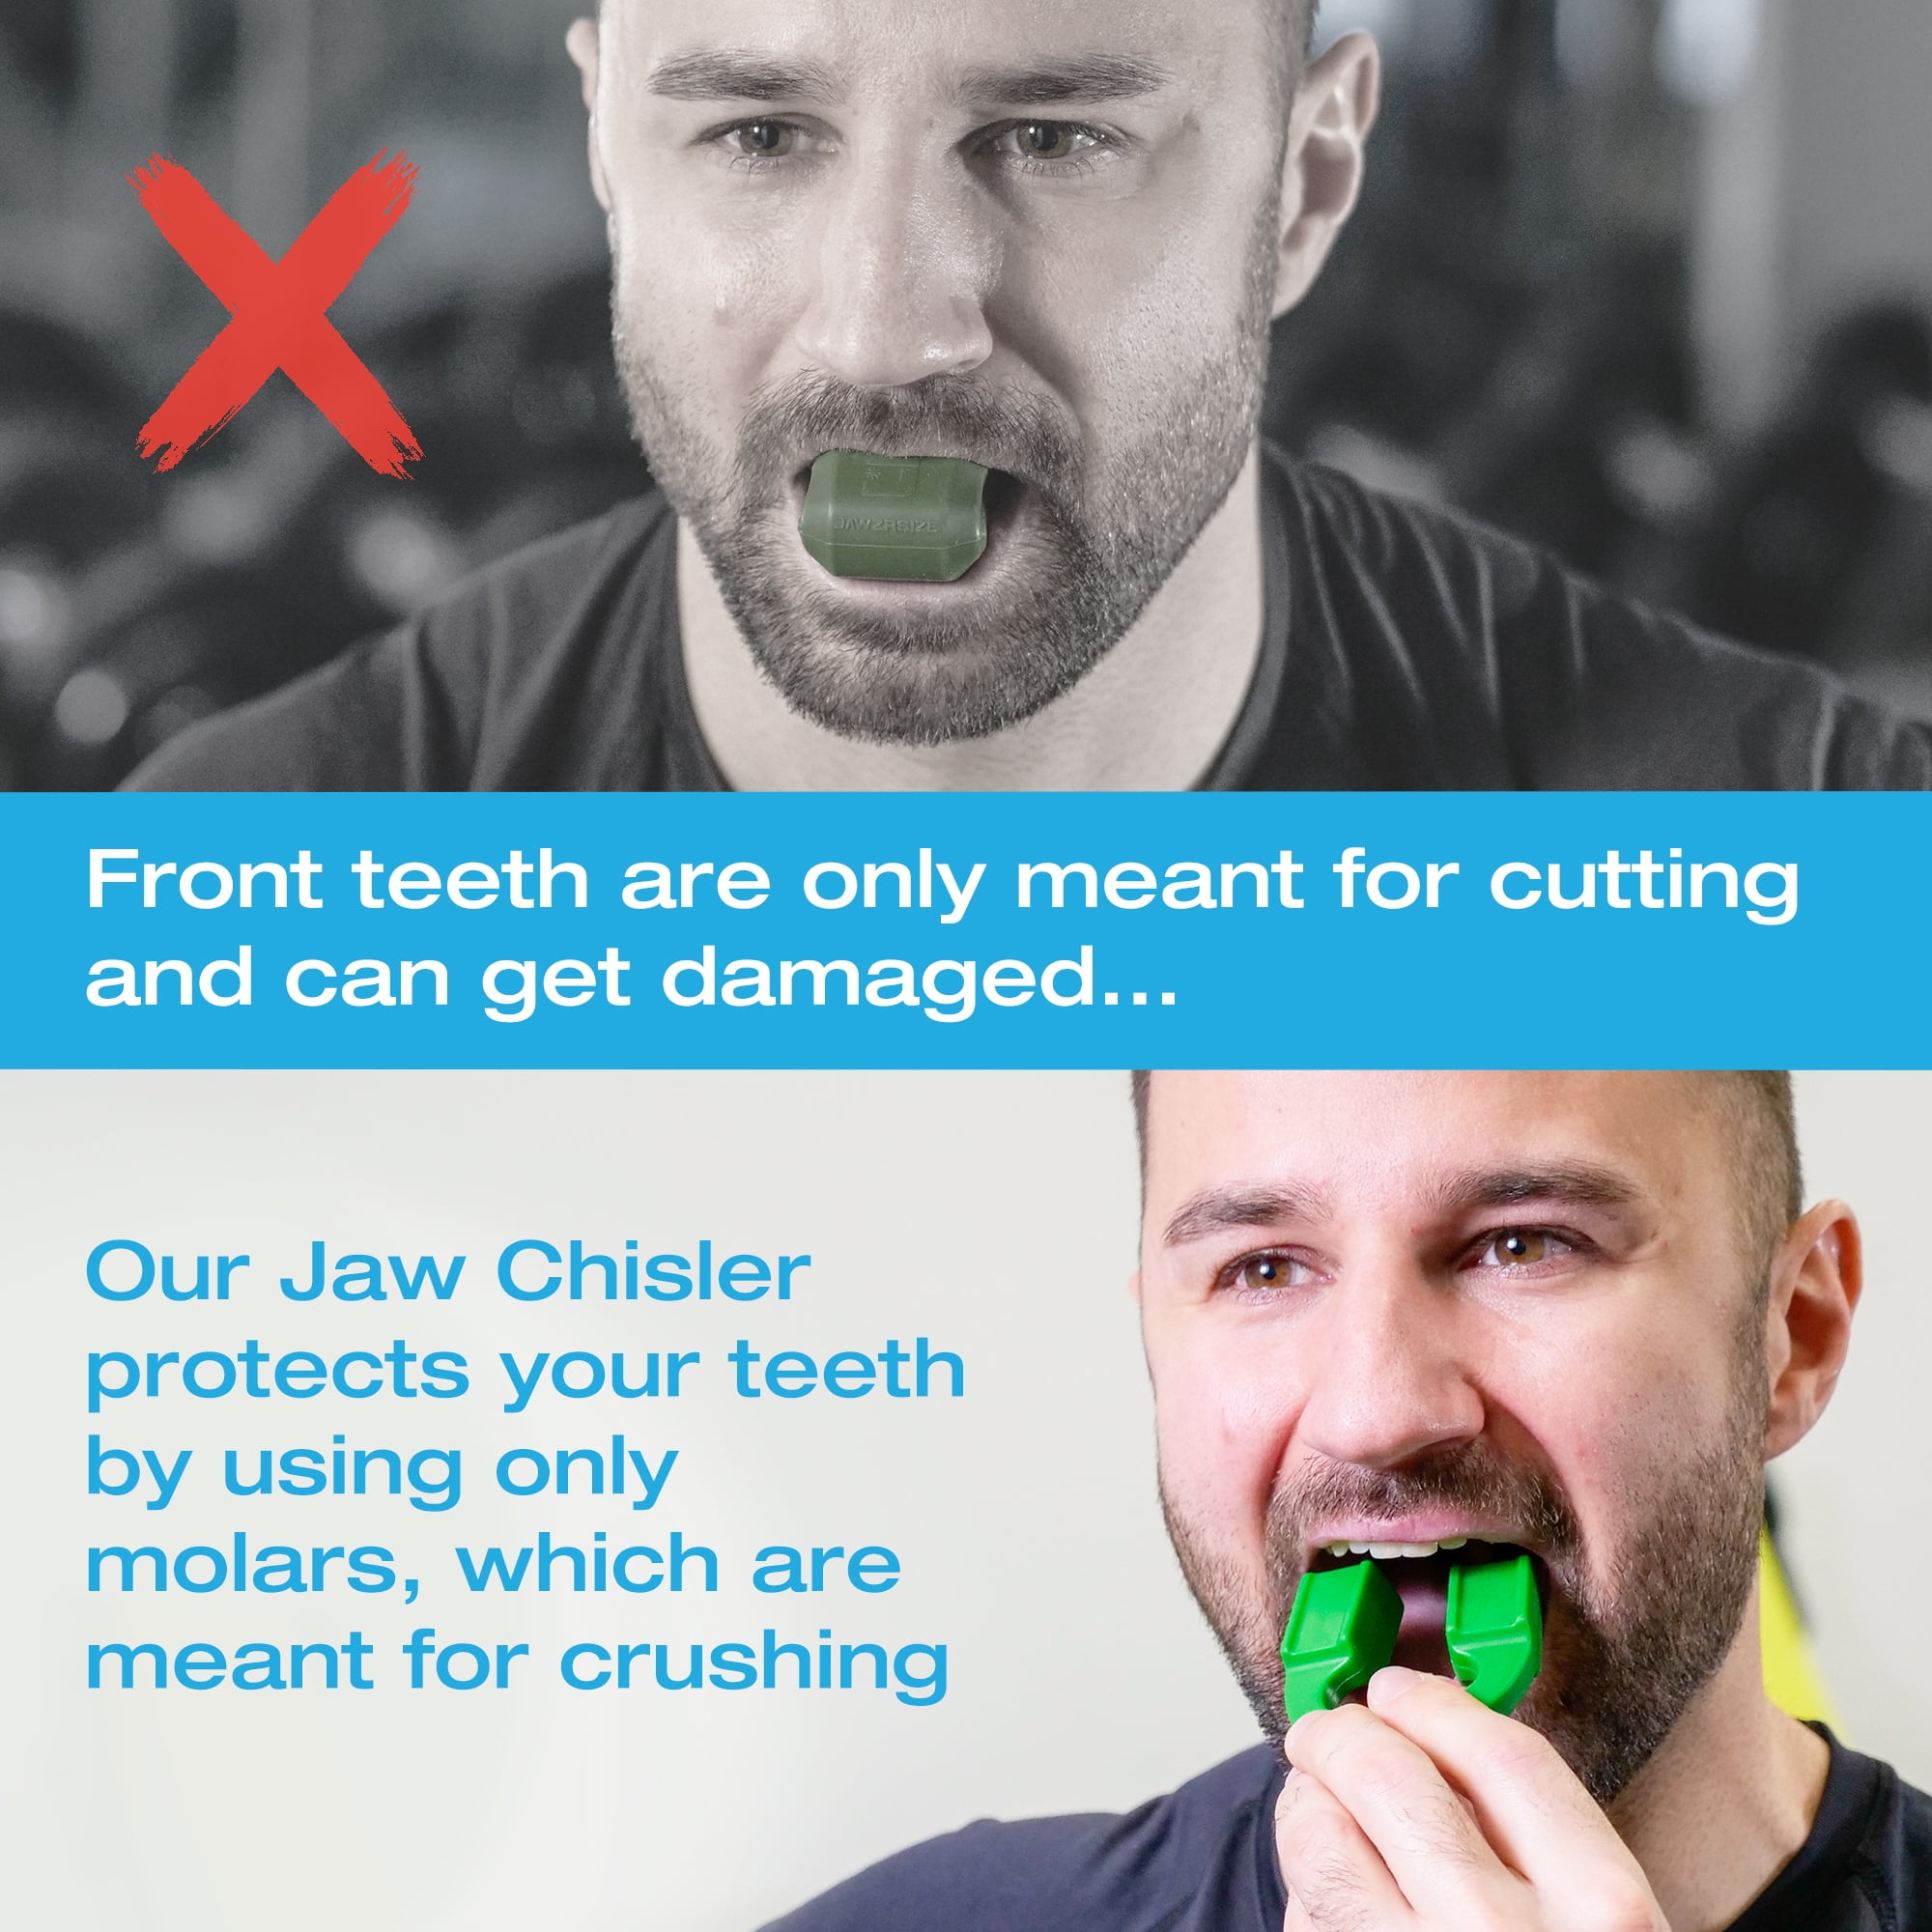 PROVO Jaw Exerciser Jawline Shaper, Jaw Trainer Chew Device for Men & –  EveryMarket